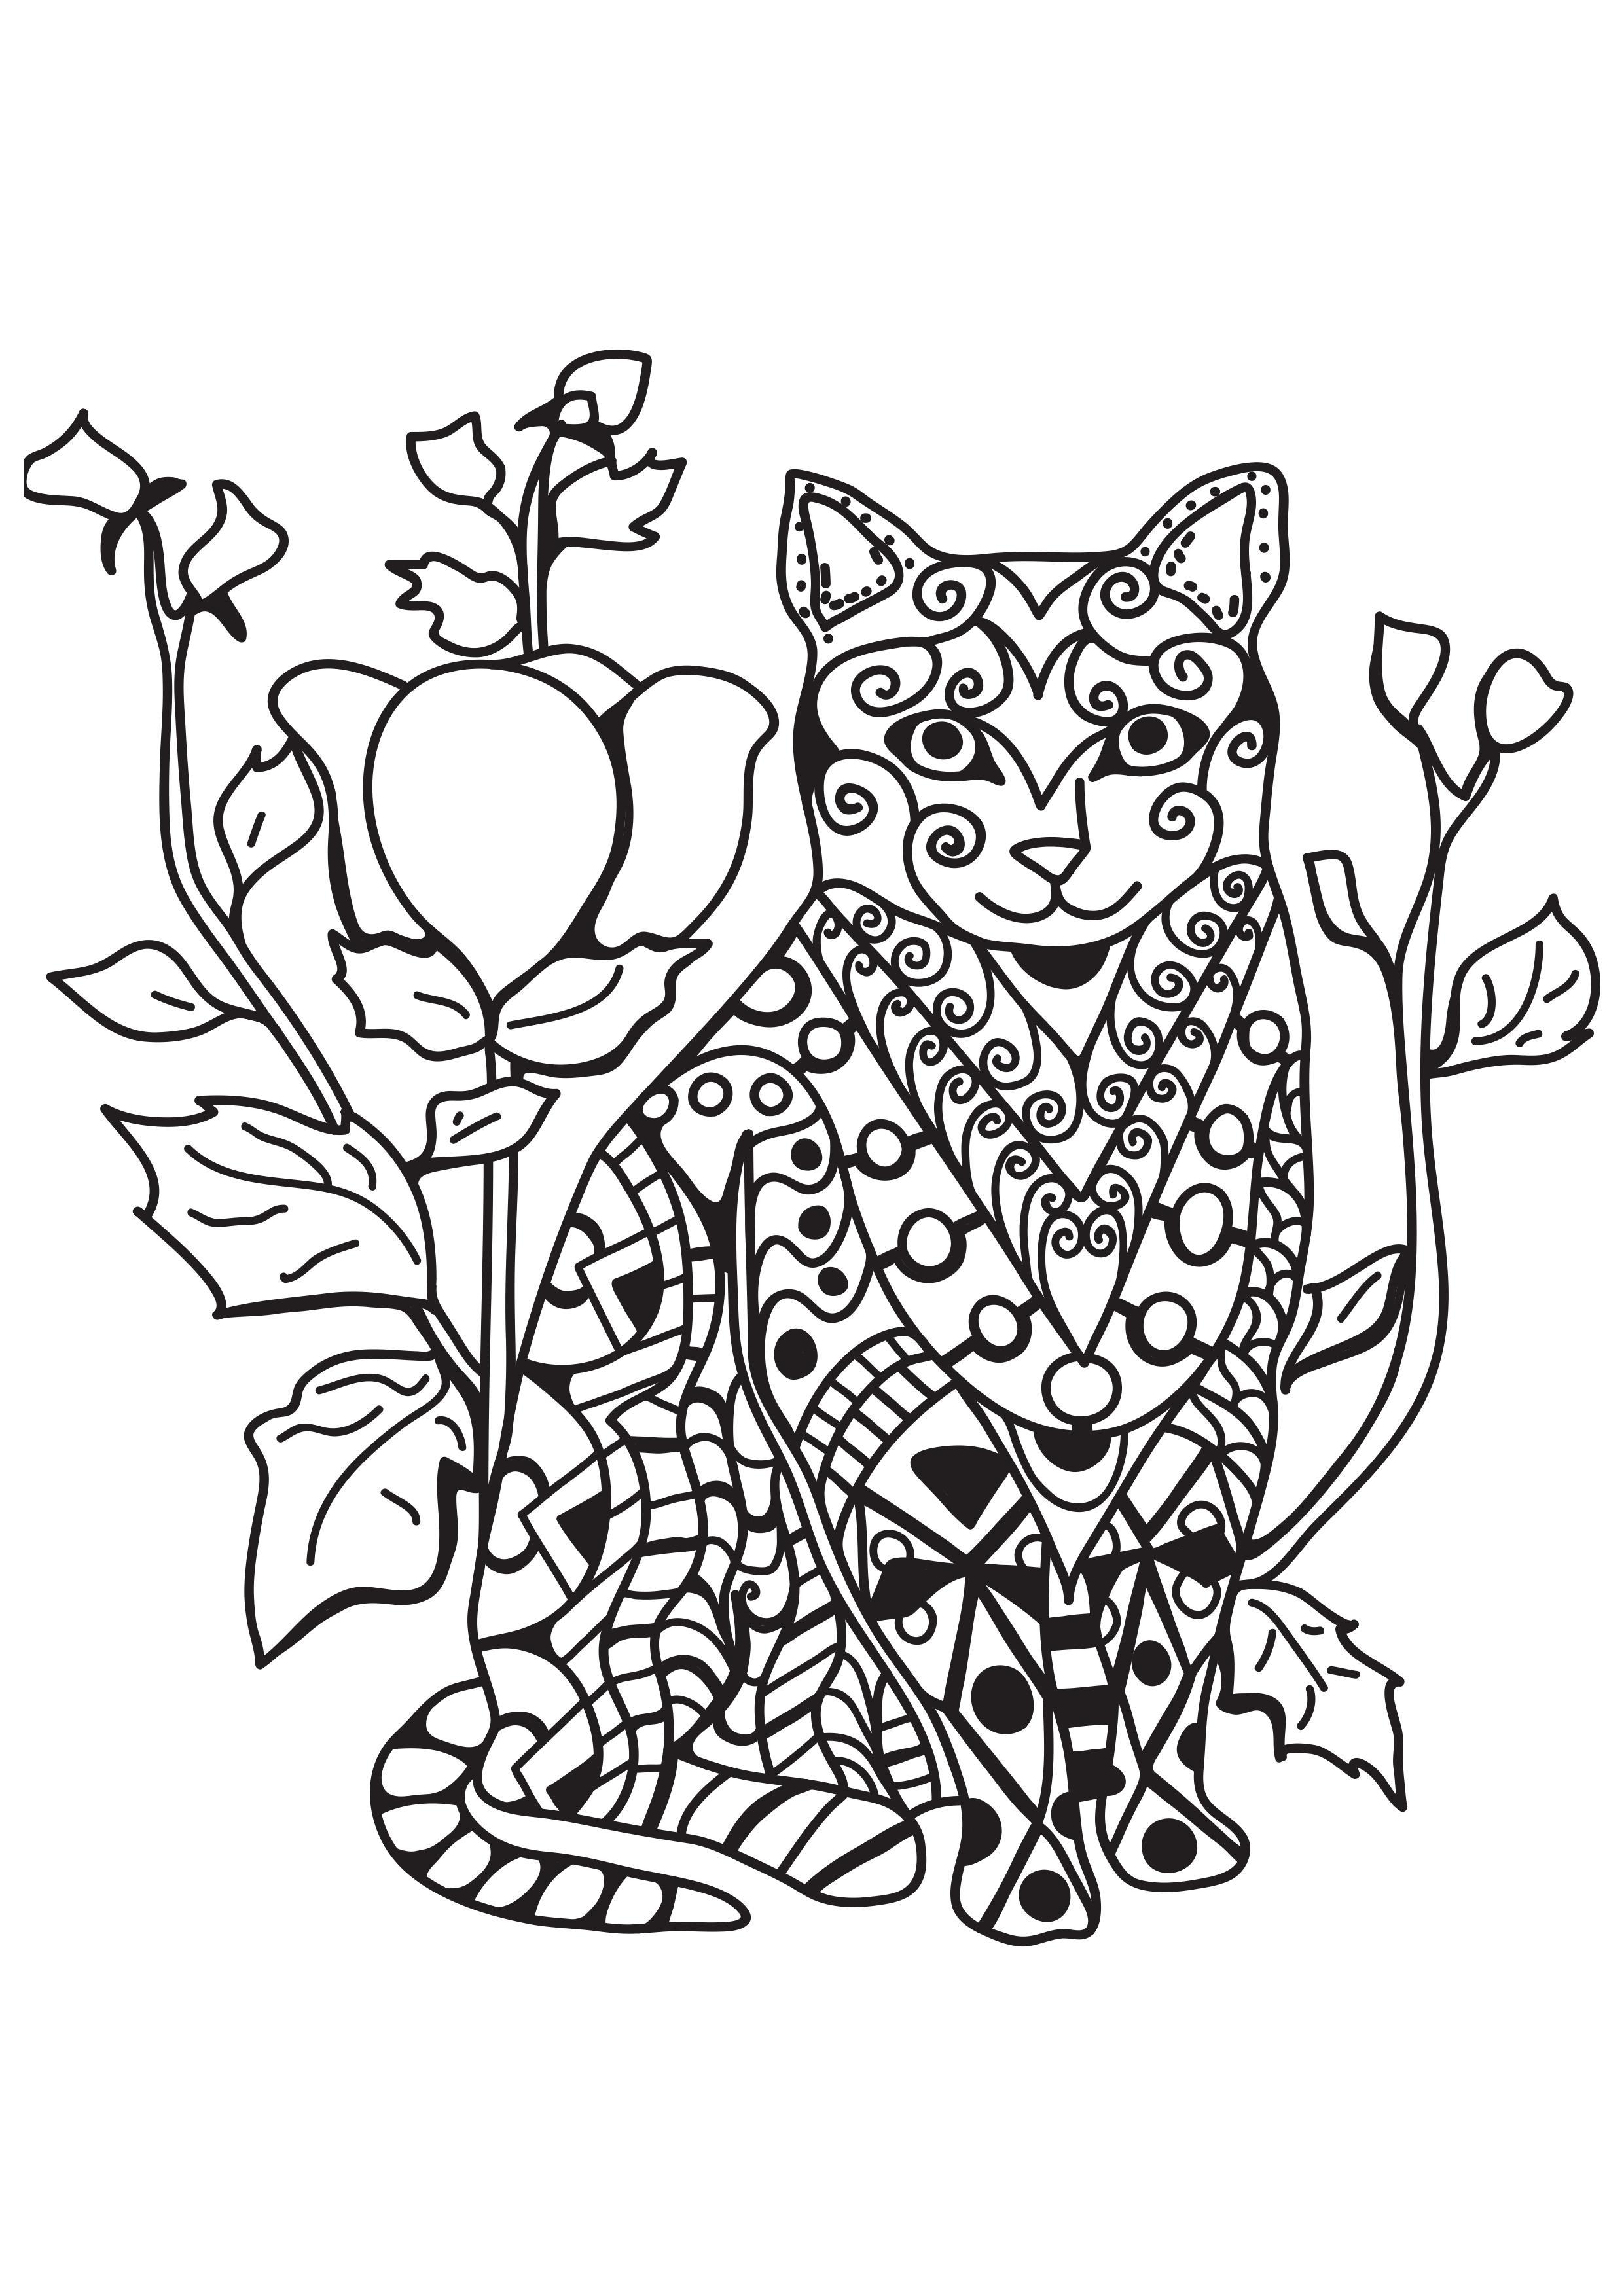 Coloring page cat in the garden